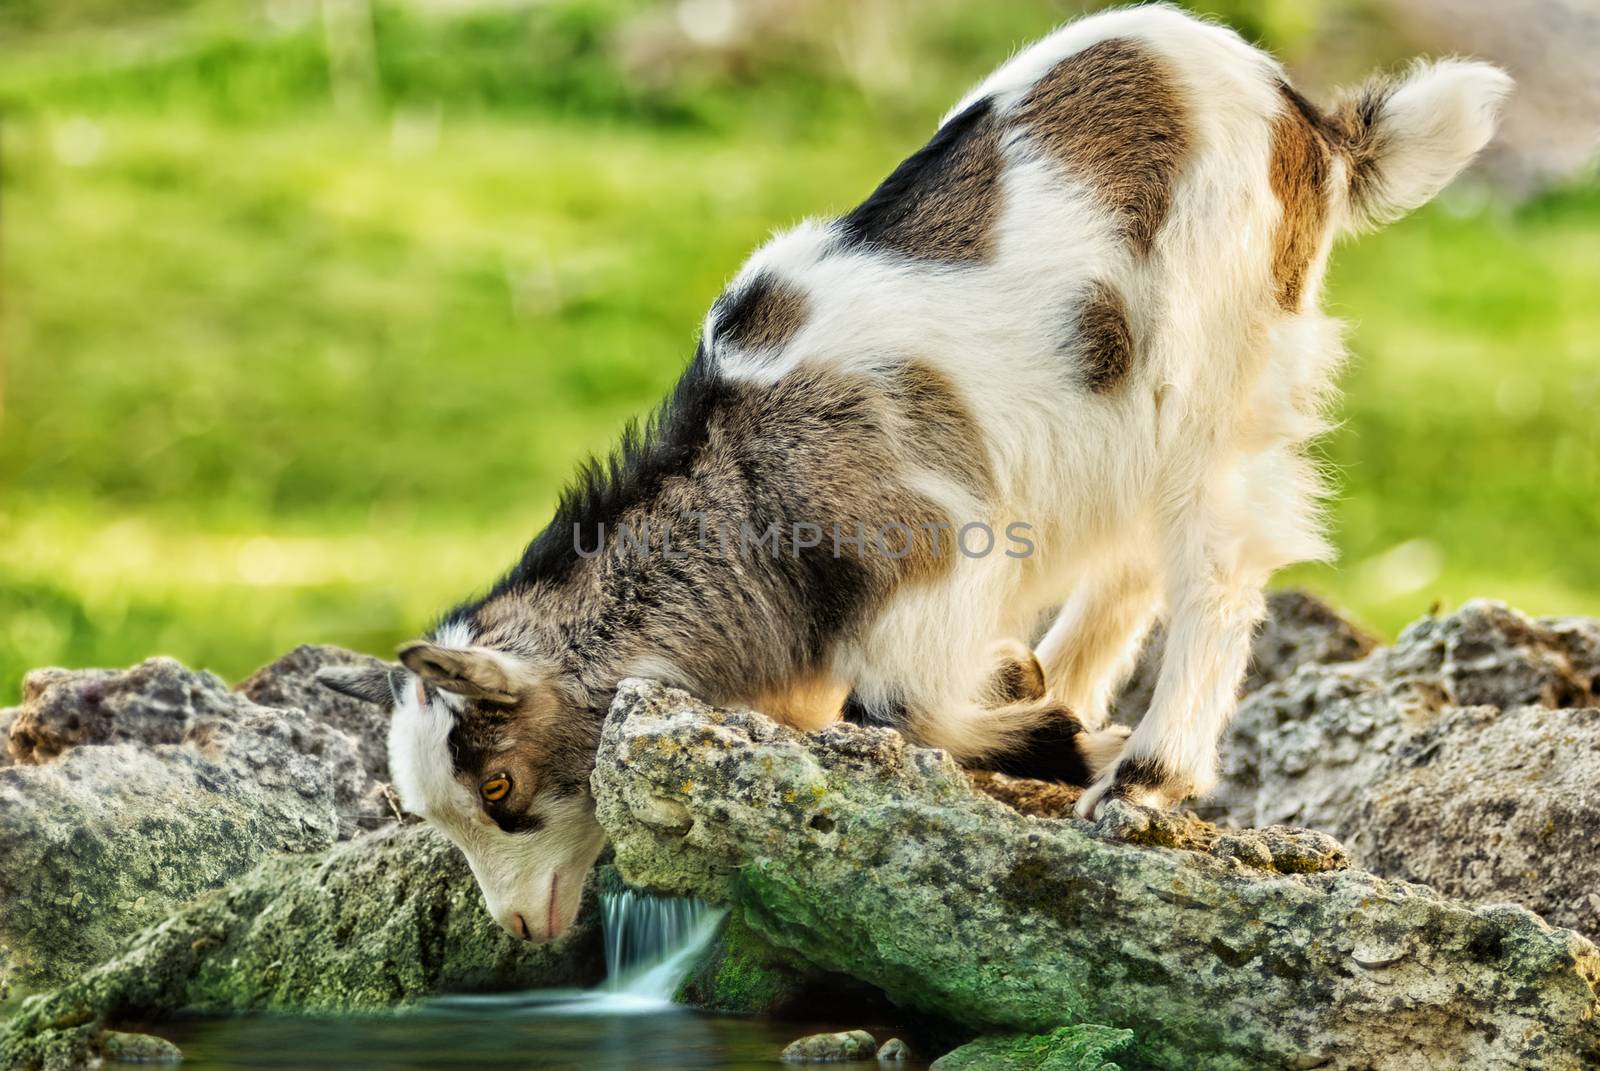 she goat kid looking in it's reflection in the water stream